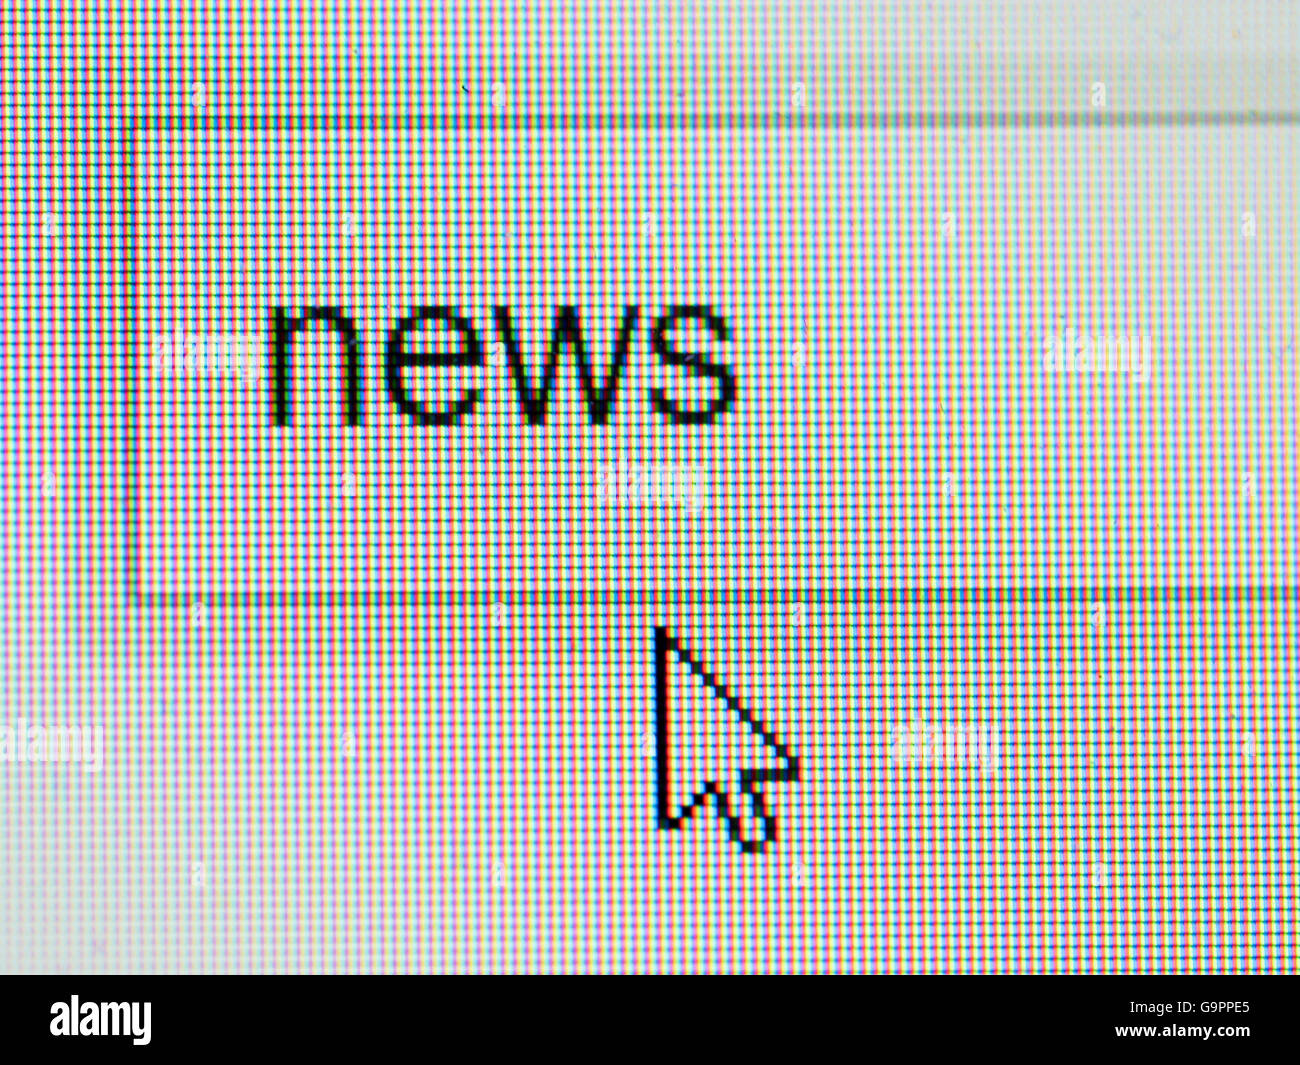 Business and technology: news text on screen with some copy space Stock Photo